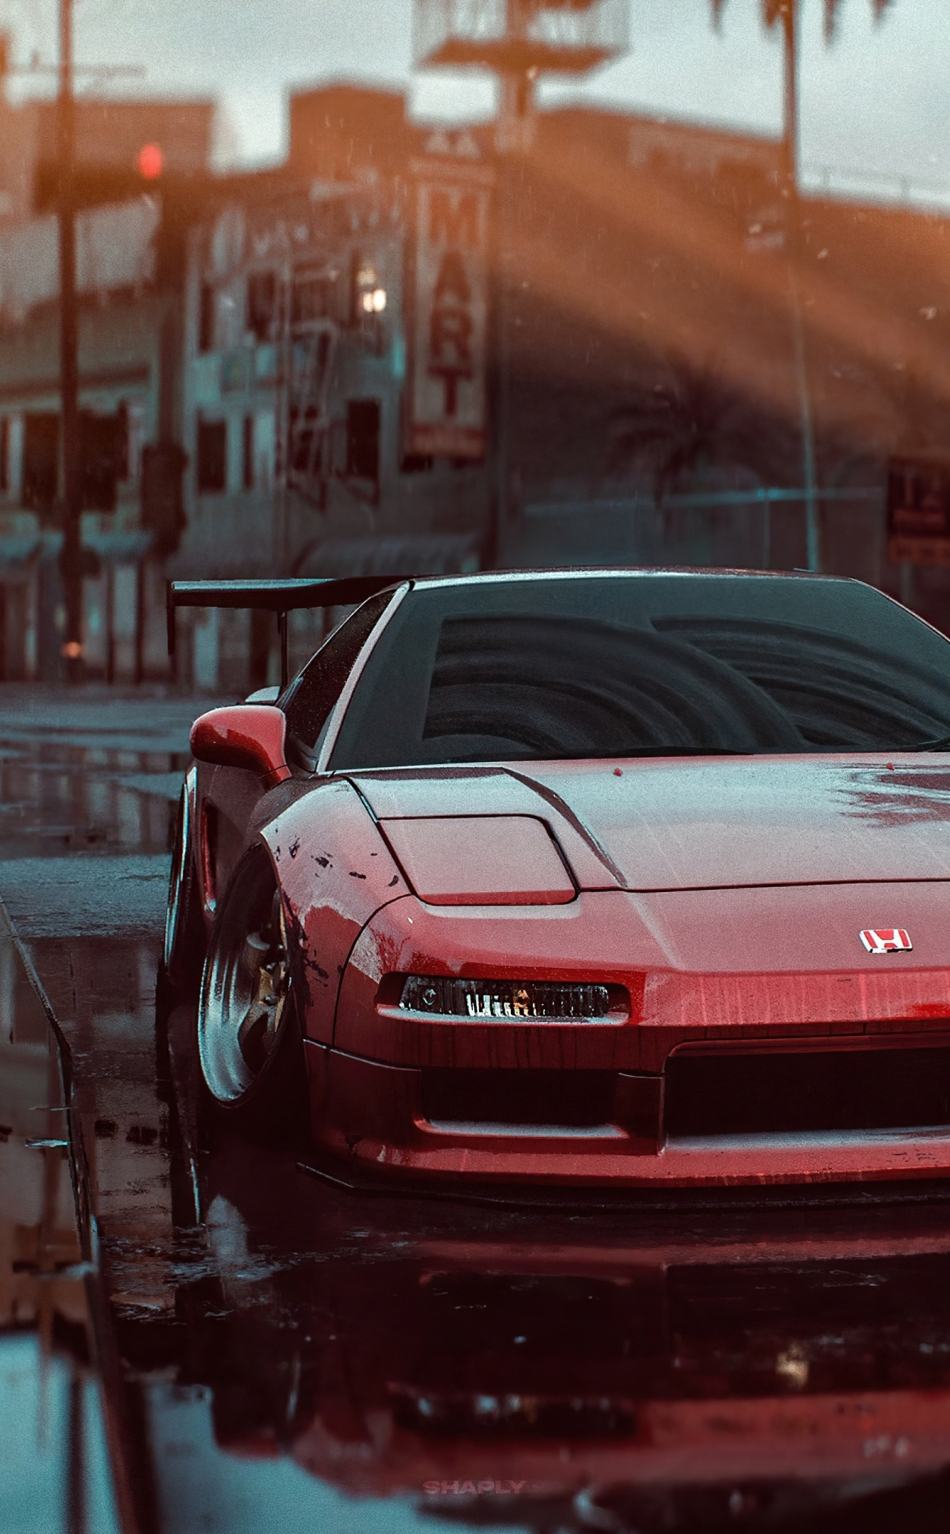 Download 950x1534 Wallpaper Red Honda Nsx Need For Speed Video Game Iphone 950x1534 Hd Image Background